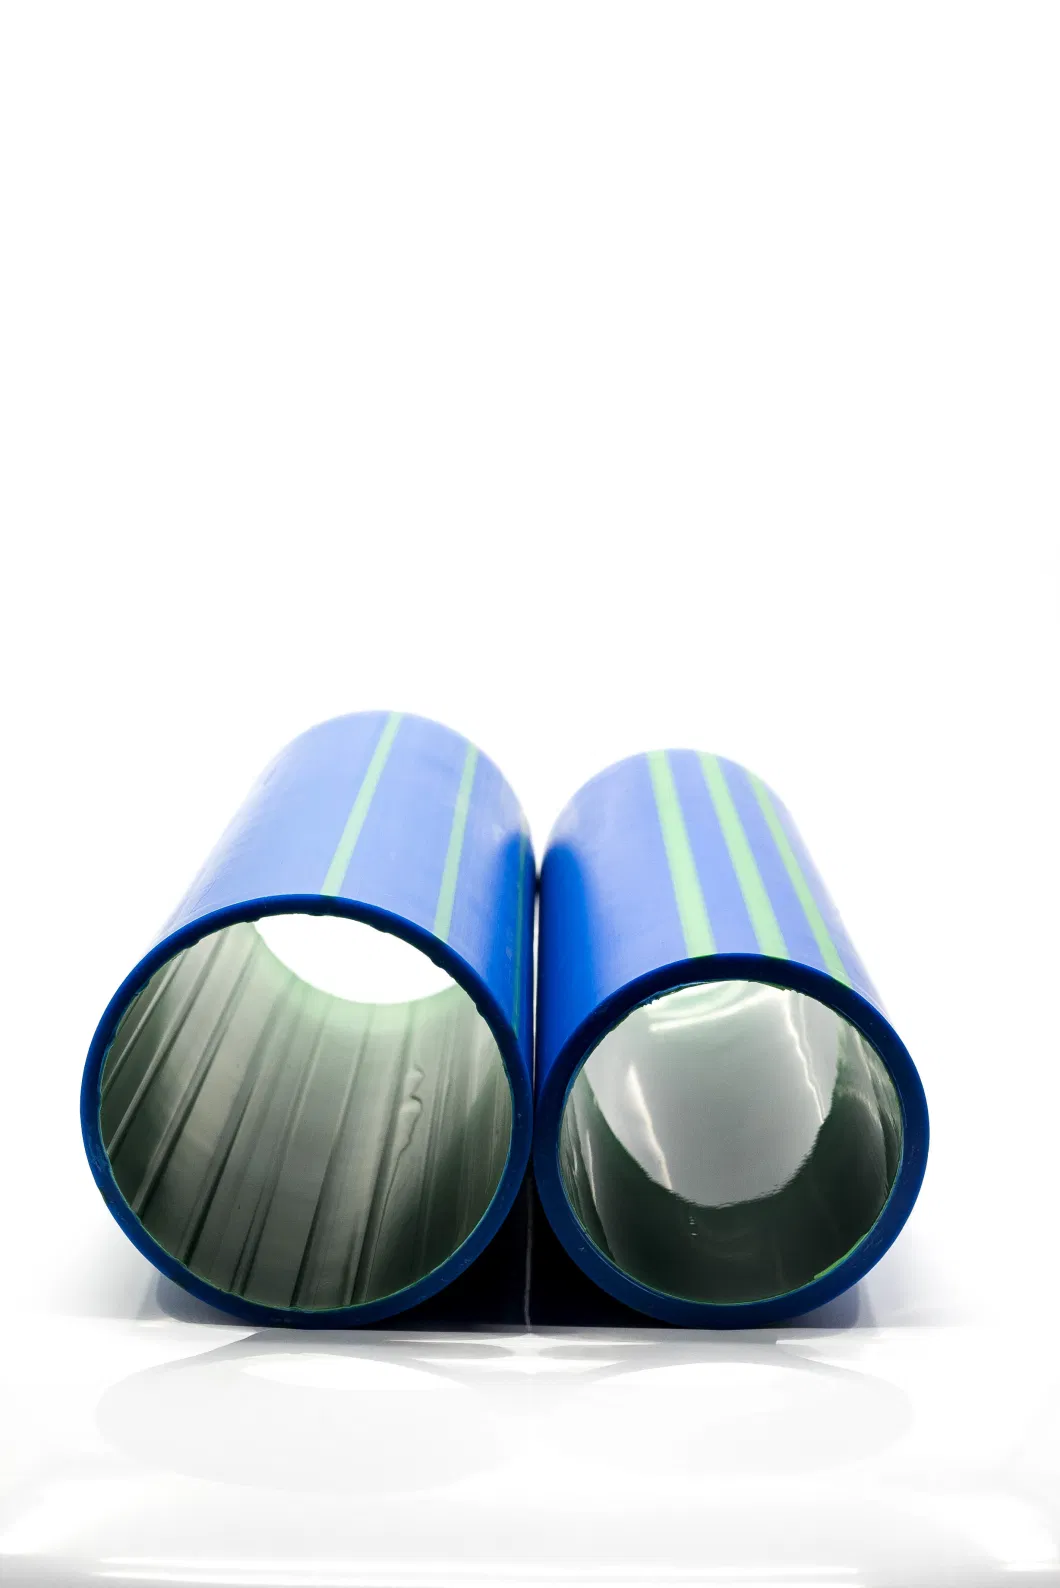 HDPE Water Supply Pipe with ISO CE Certificate Oil Pipe for Gas Station